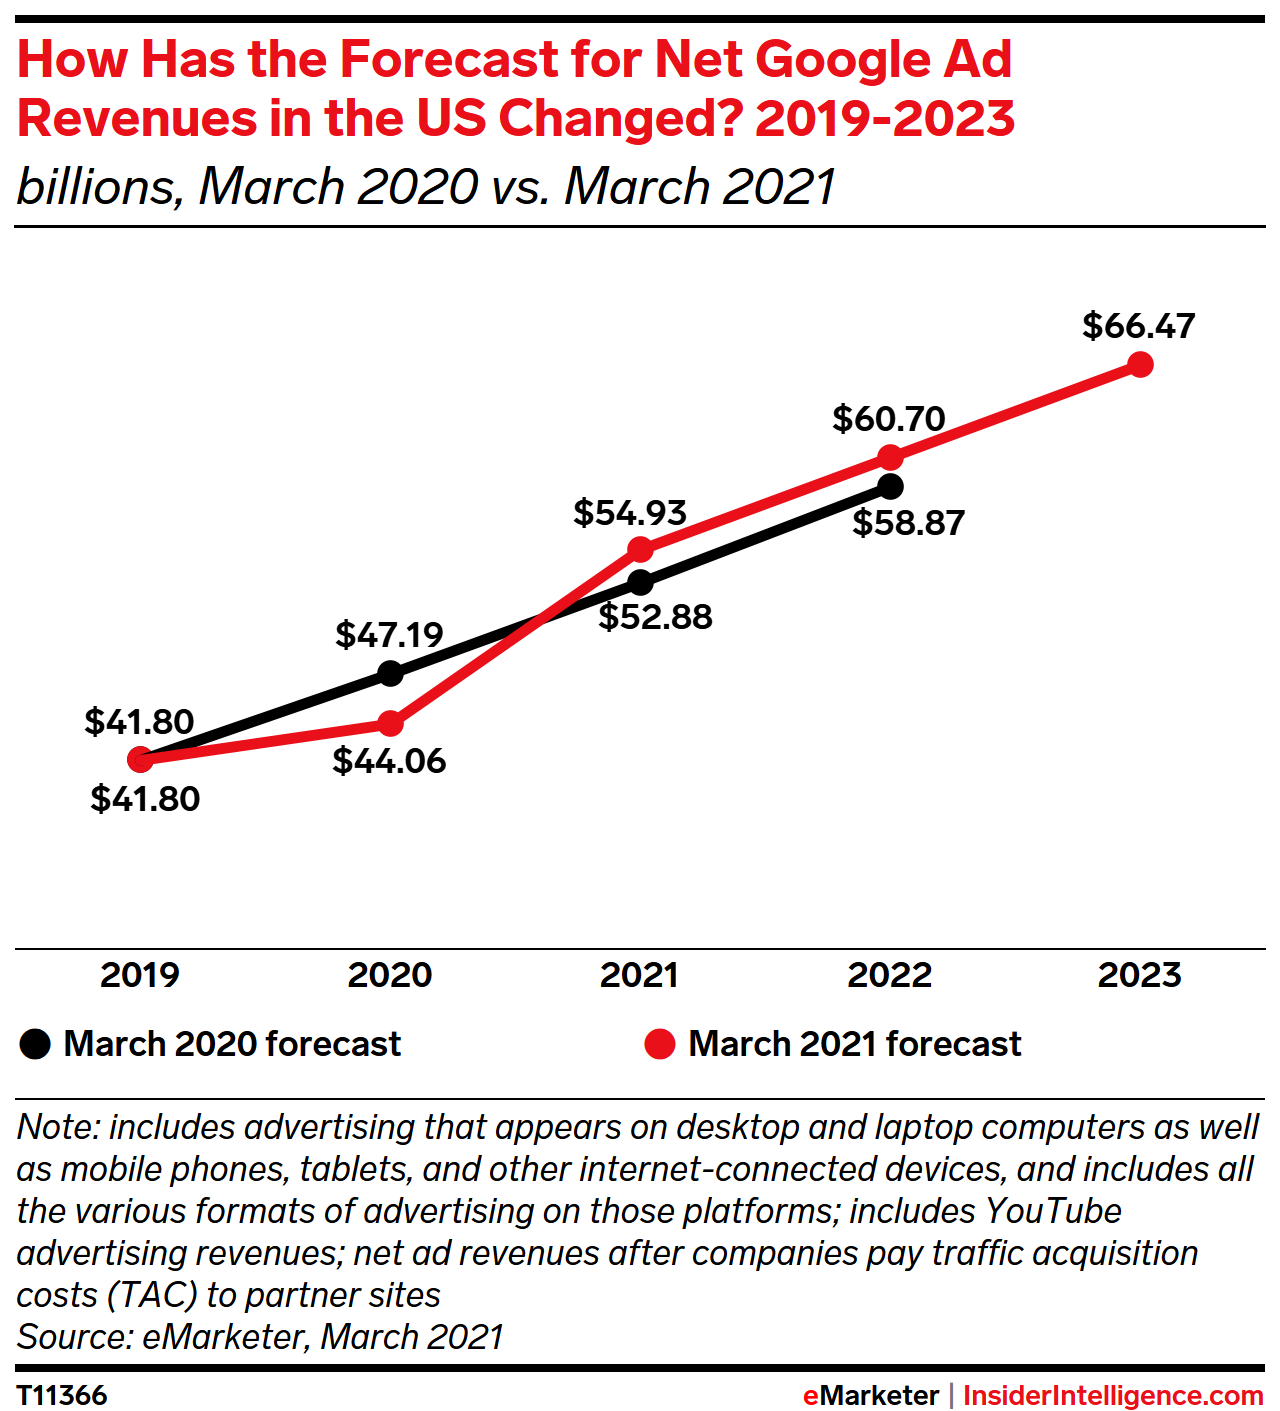 How Has the Forecast for Net Google Ad Revenues in the US Changed? 2019-2023 (billions)